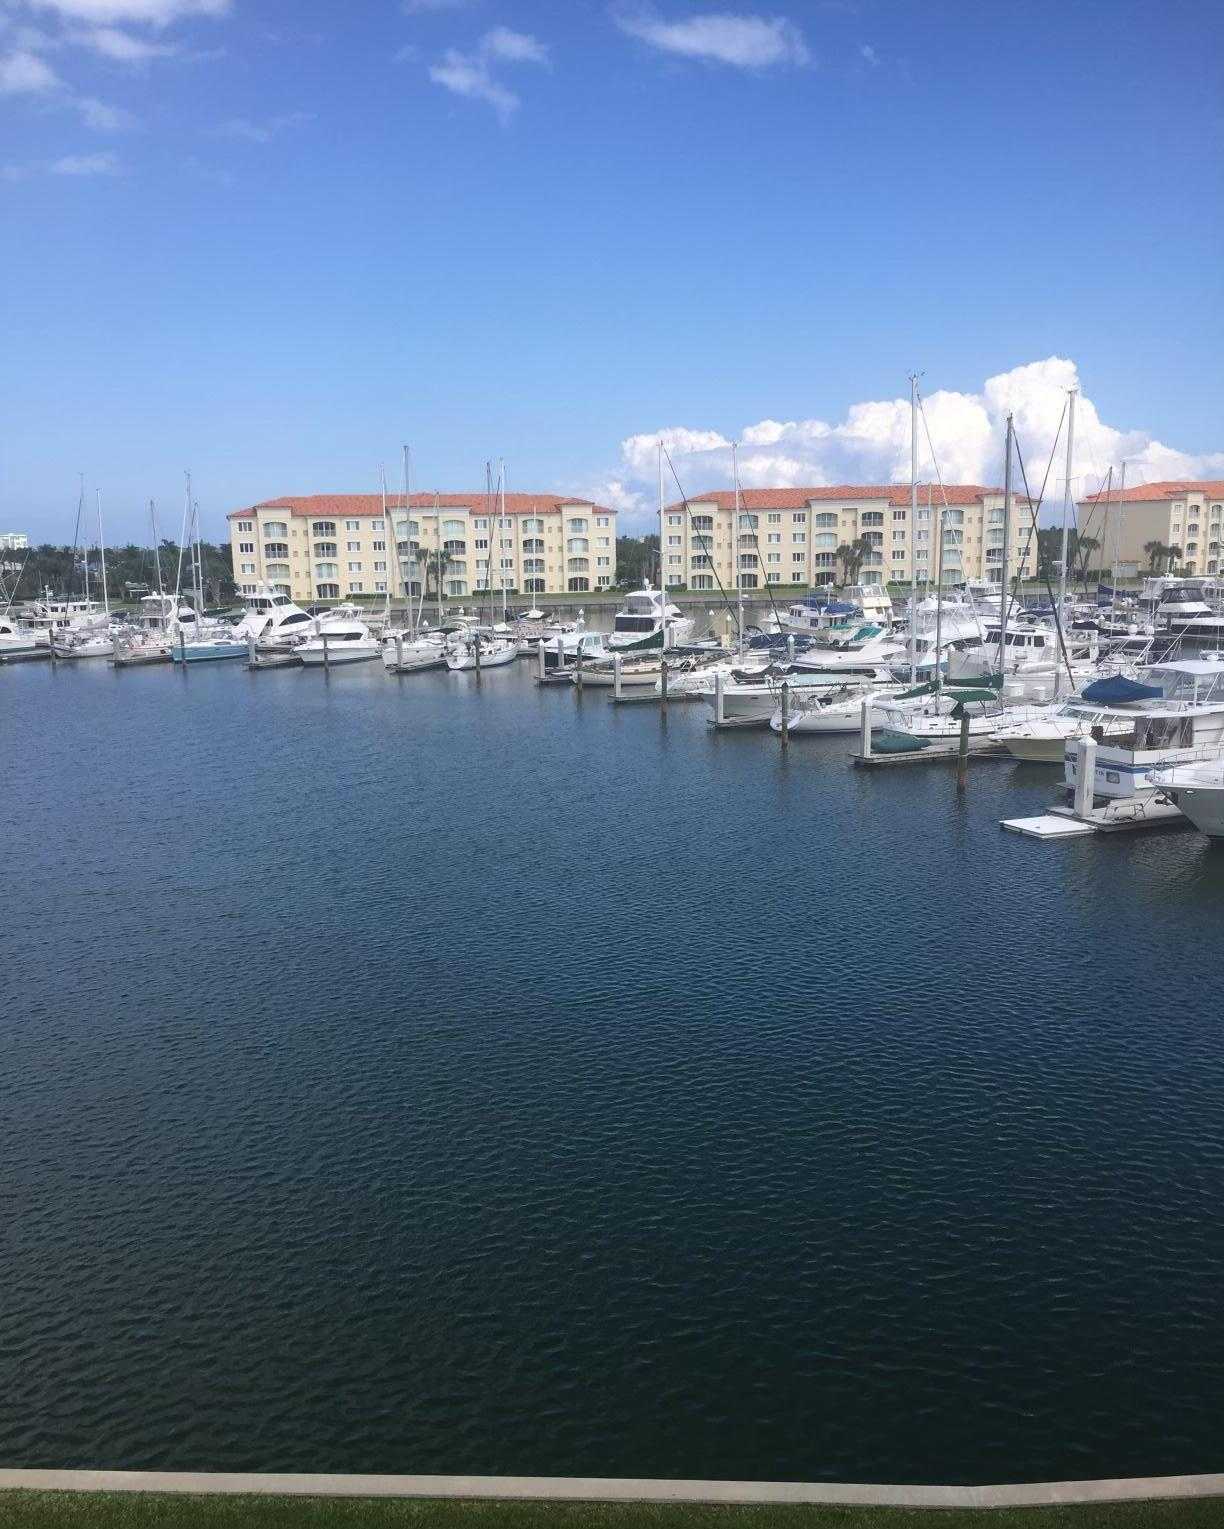 View Fort Pierce, FL 34949 residential property